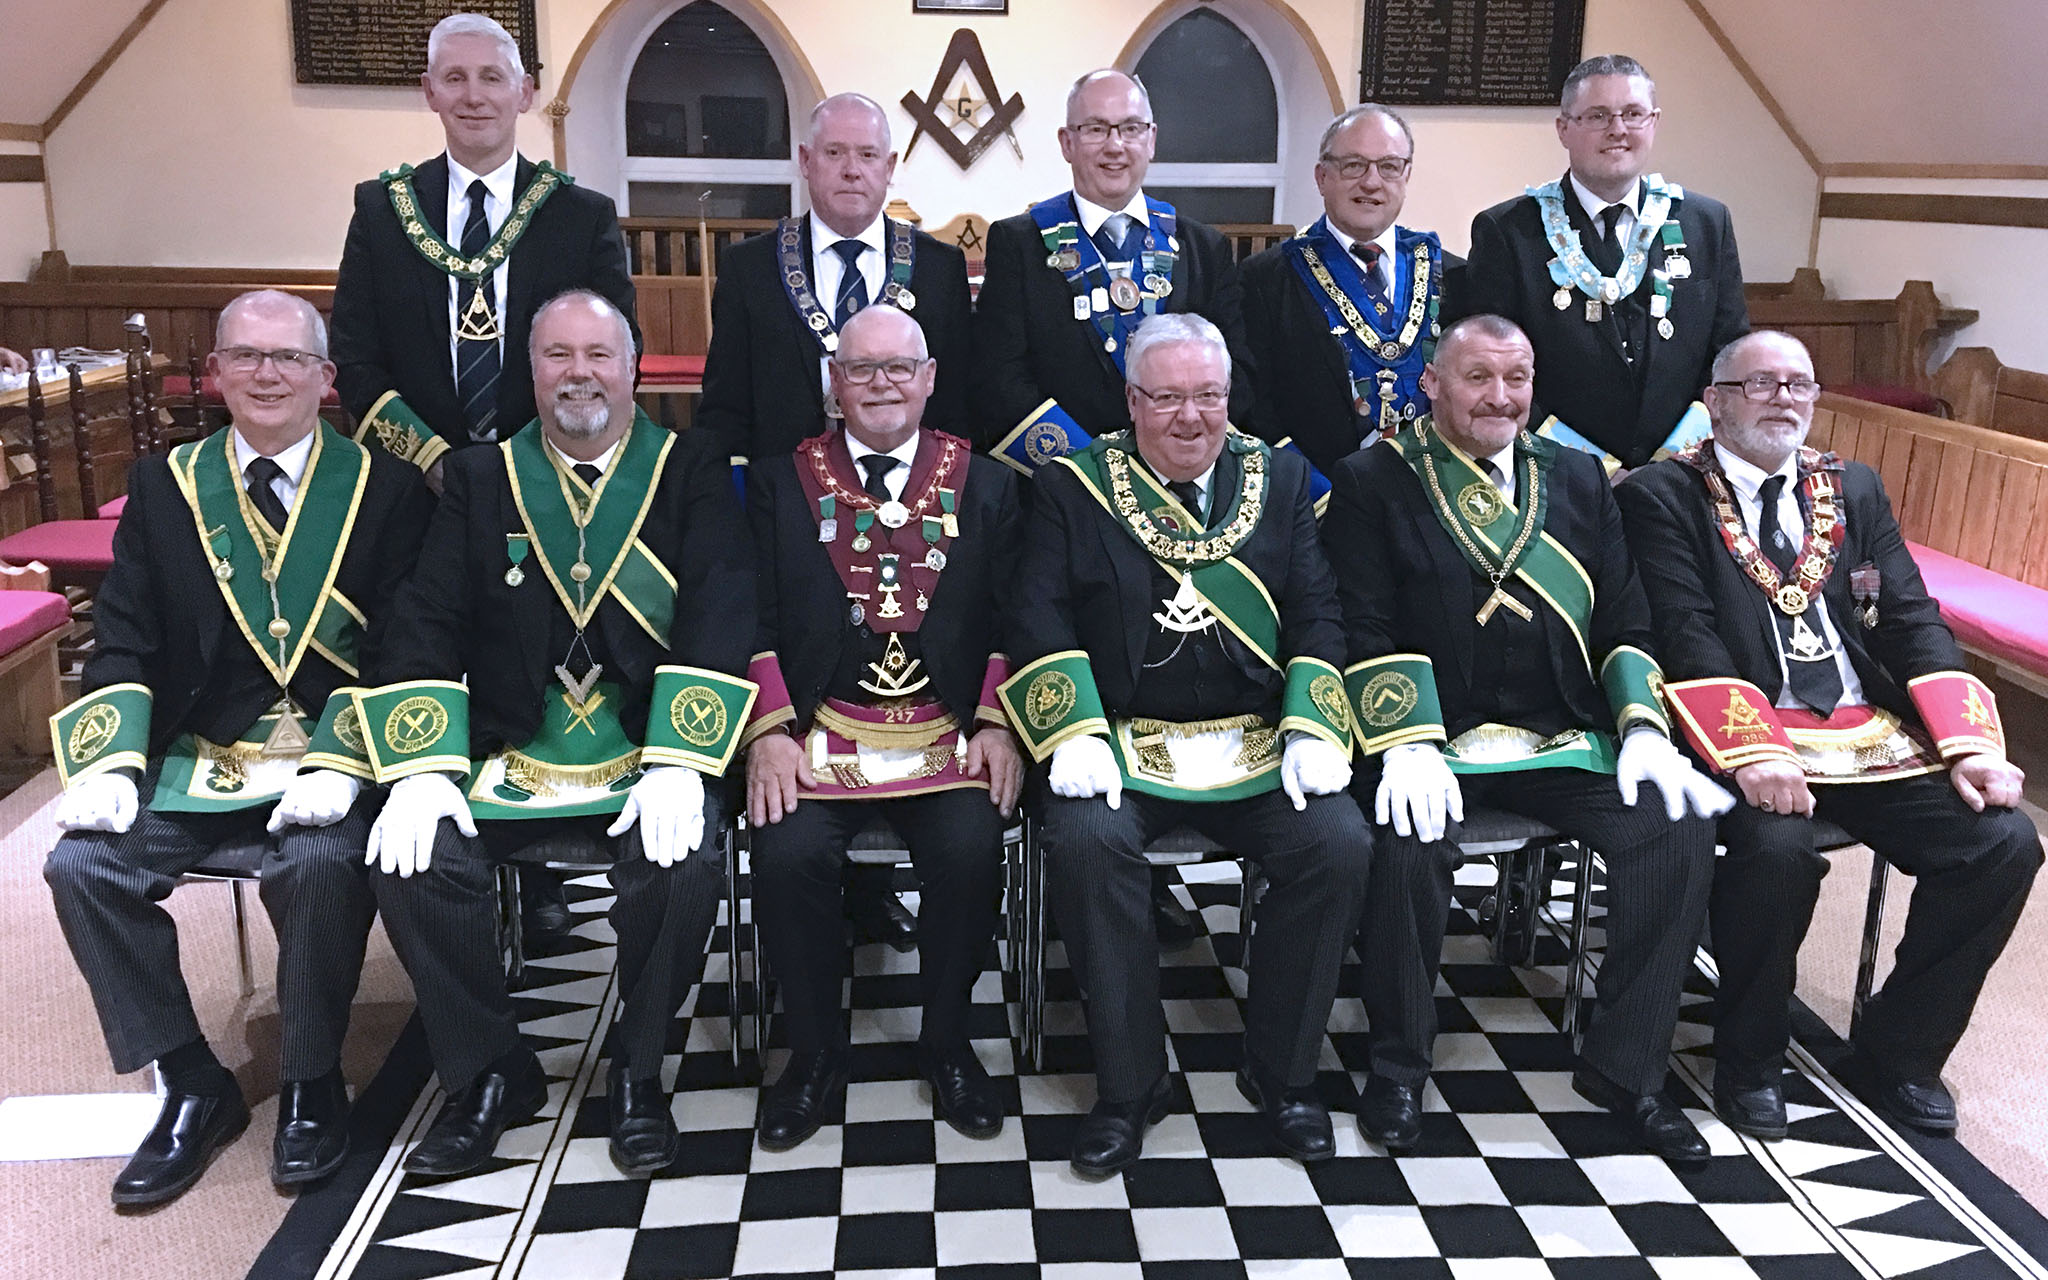 Provincial Office Bearers and Masters of the Province